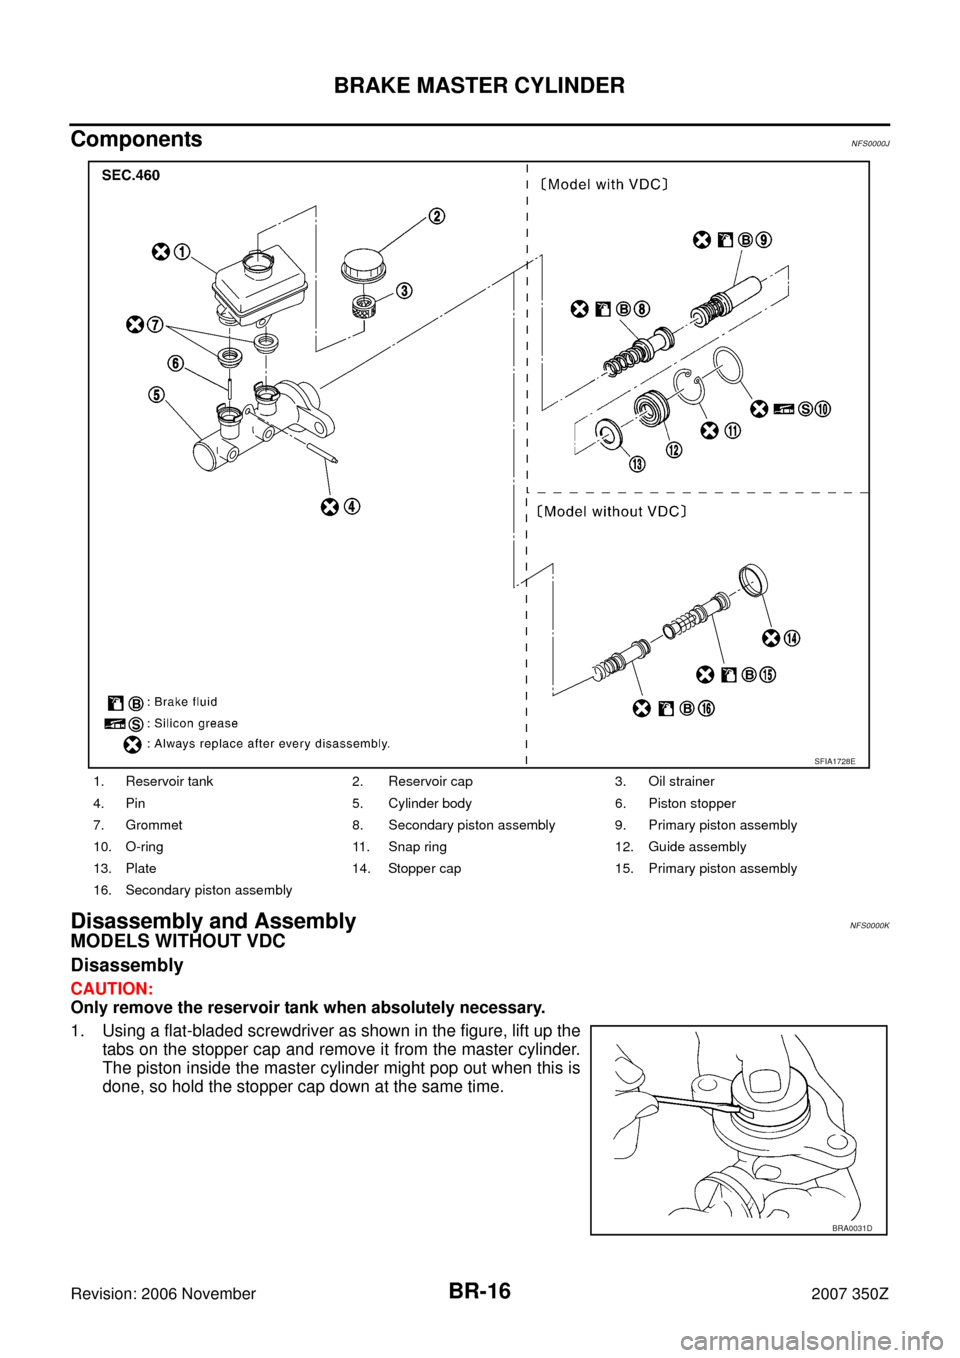 NISSAN 350Z 2007 Z33 Brake System User Guide BR-16
BRAKE MASTER CYLINDER
Revision: 2006 November2007 350Z
ComponentsNFS0000J
Disassembly and AssemblyNFS0000K
MODELS WITHOUT VDC
Disassembly
CAUTION:
Only remove the reservoir tank when absolutely 